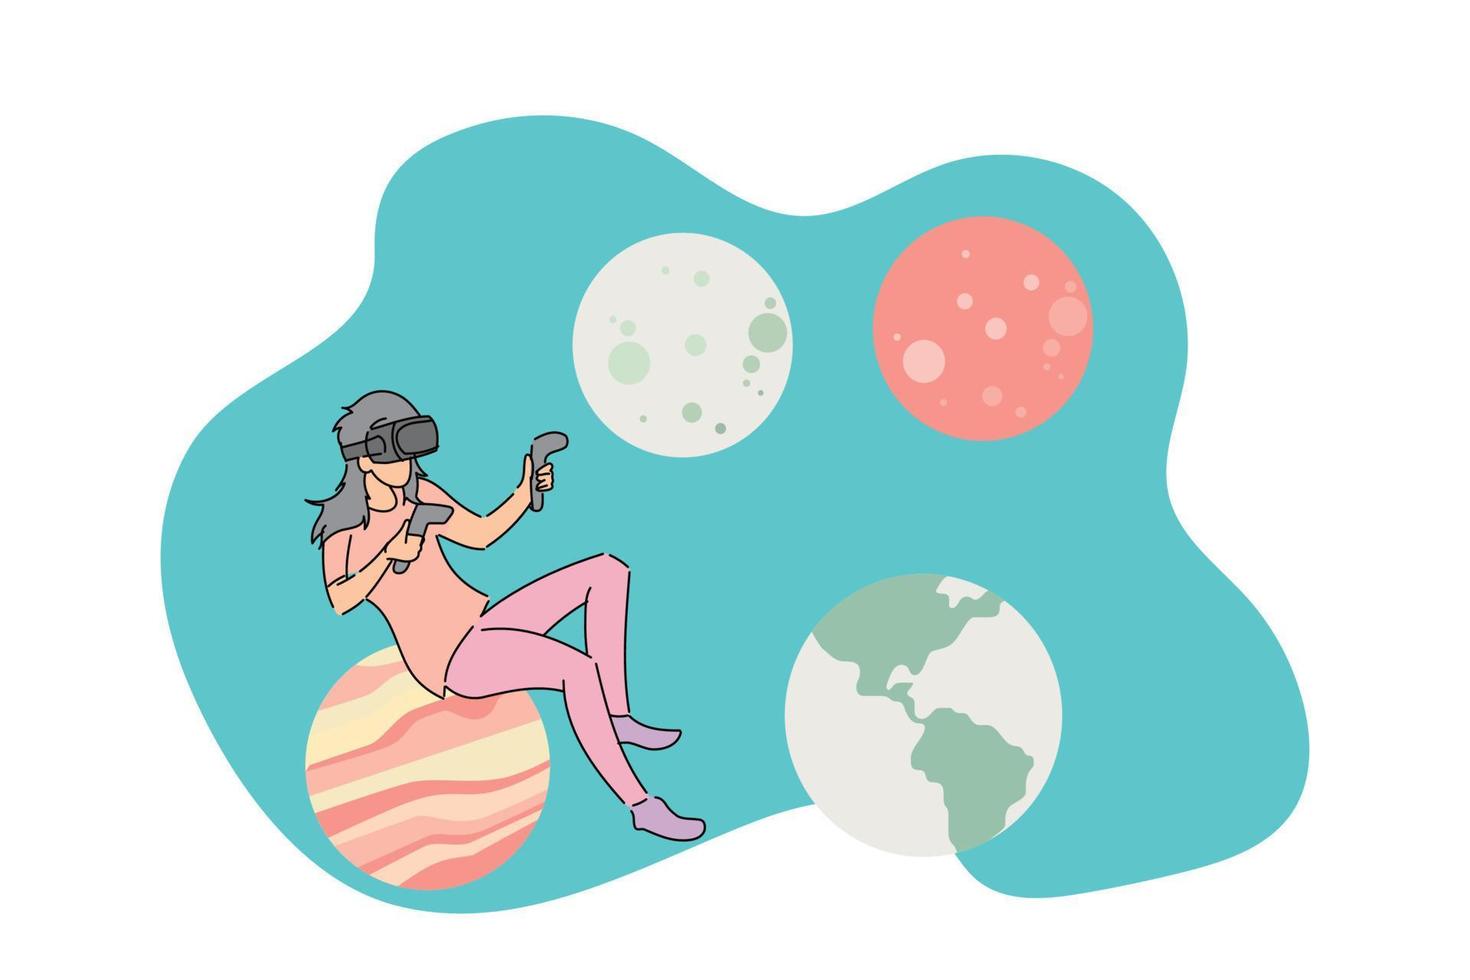 Kid using virtual reality to study. Young woman examining planet with VR device. Flat vector illustration design